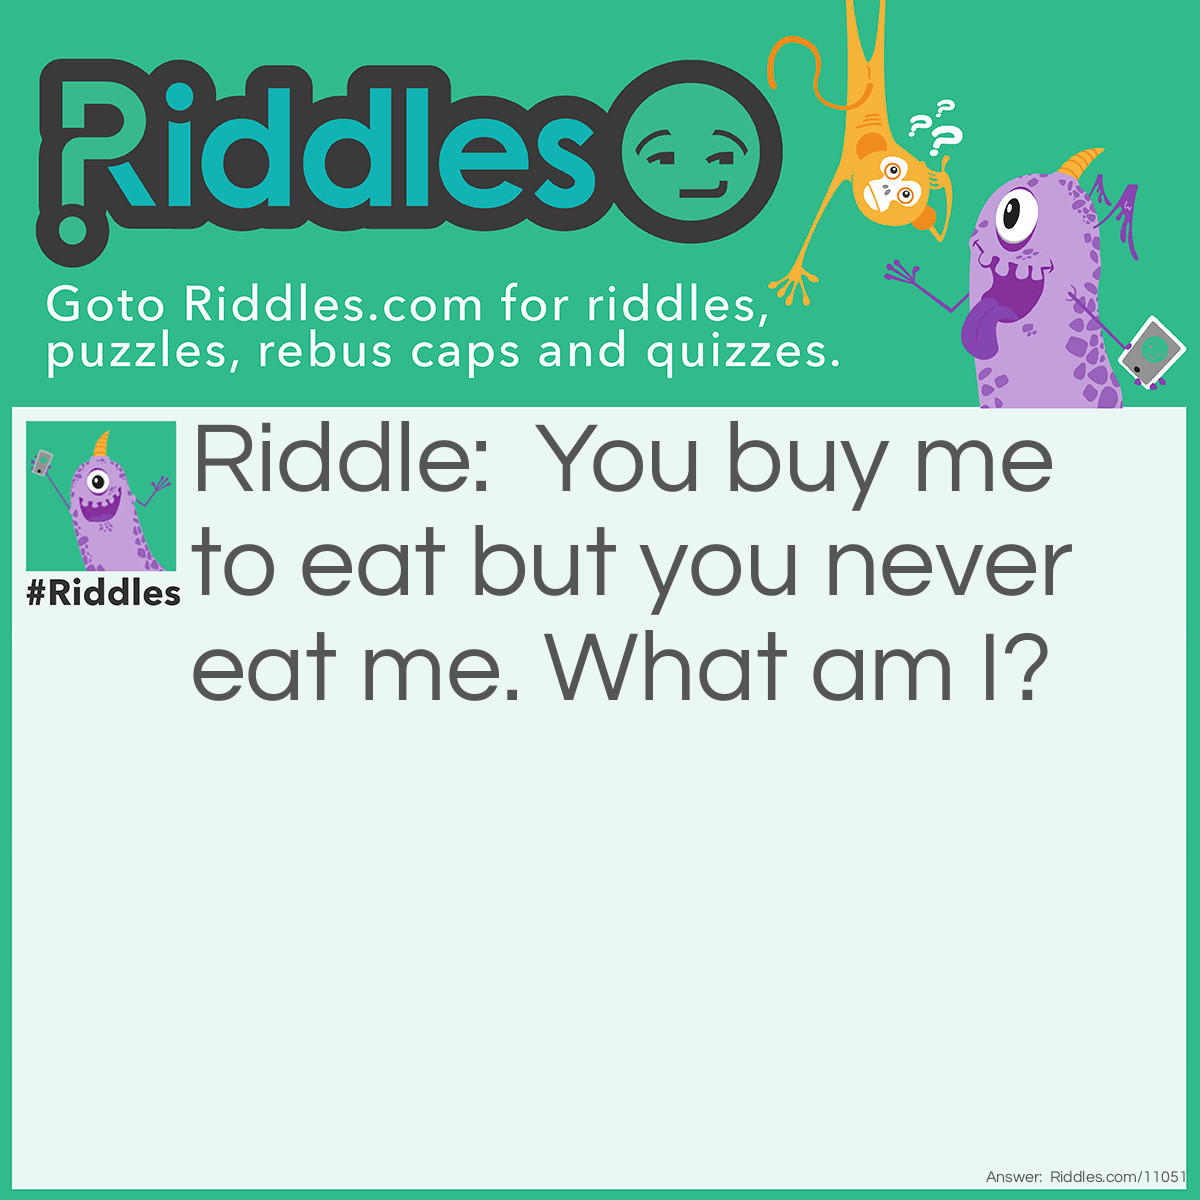 Riddle: You buy me to eat but you never eat me. What am I? Answer: Plates and bowls.